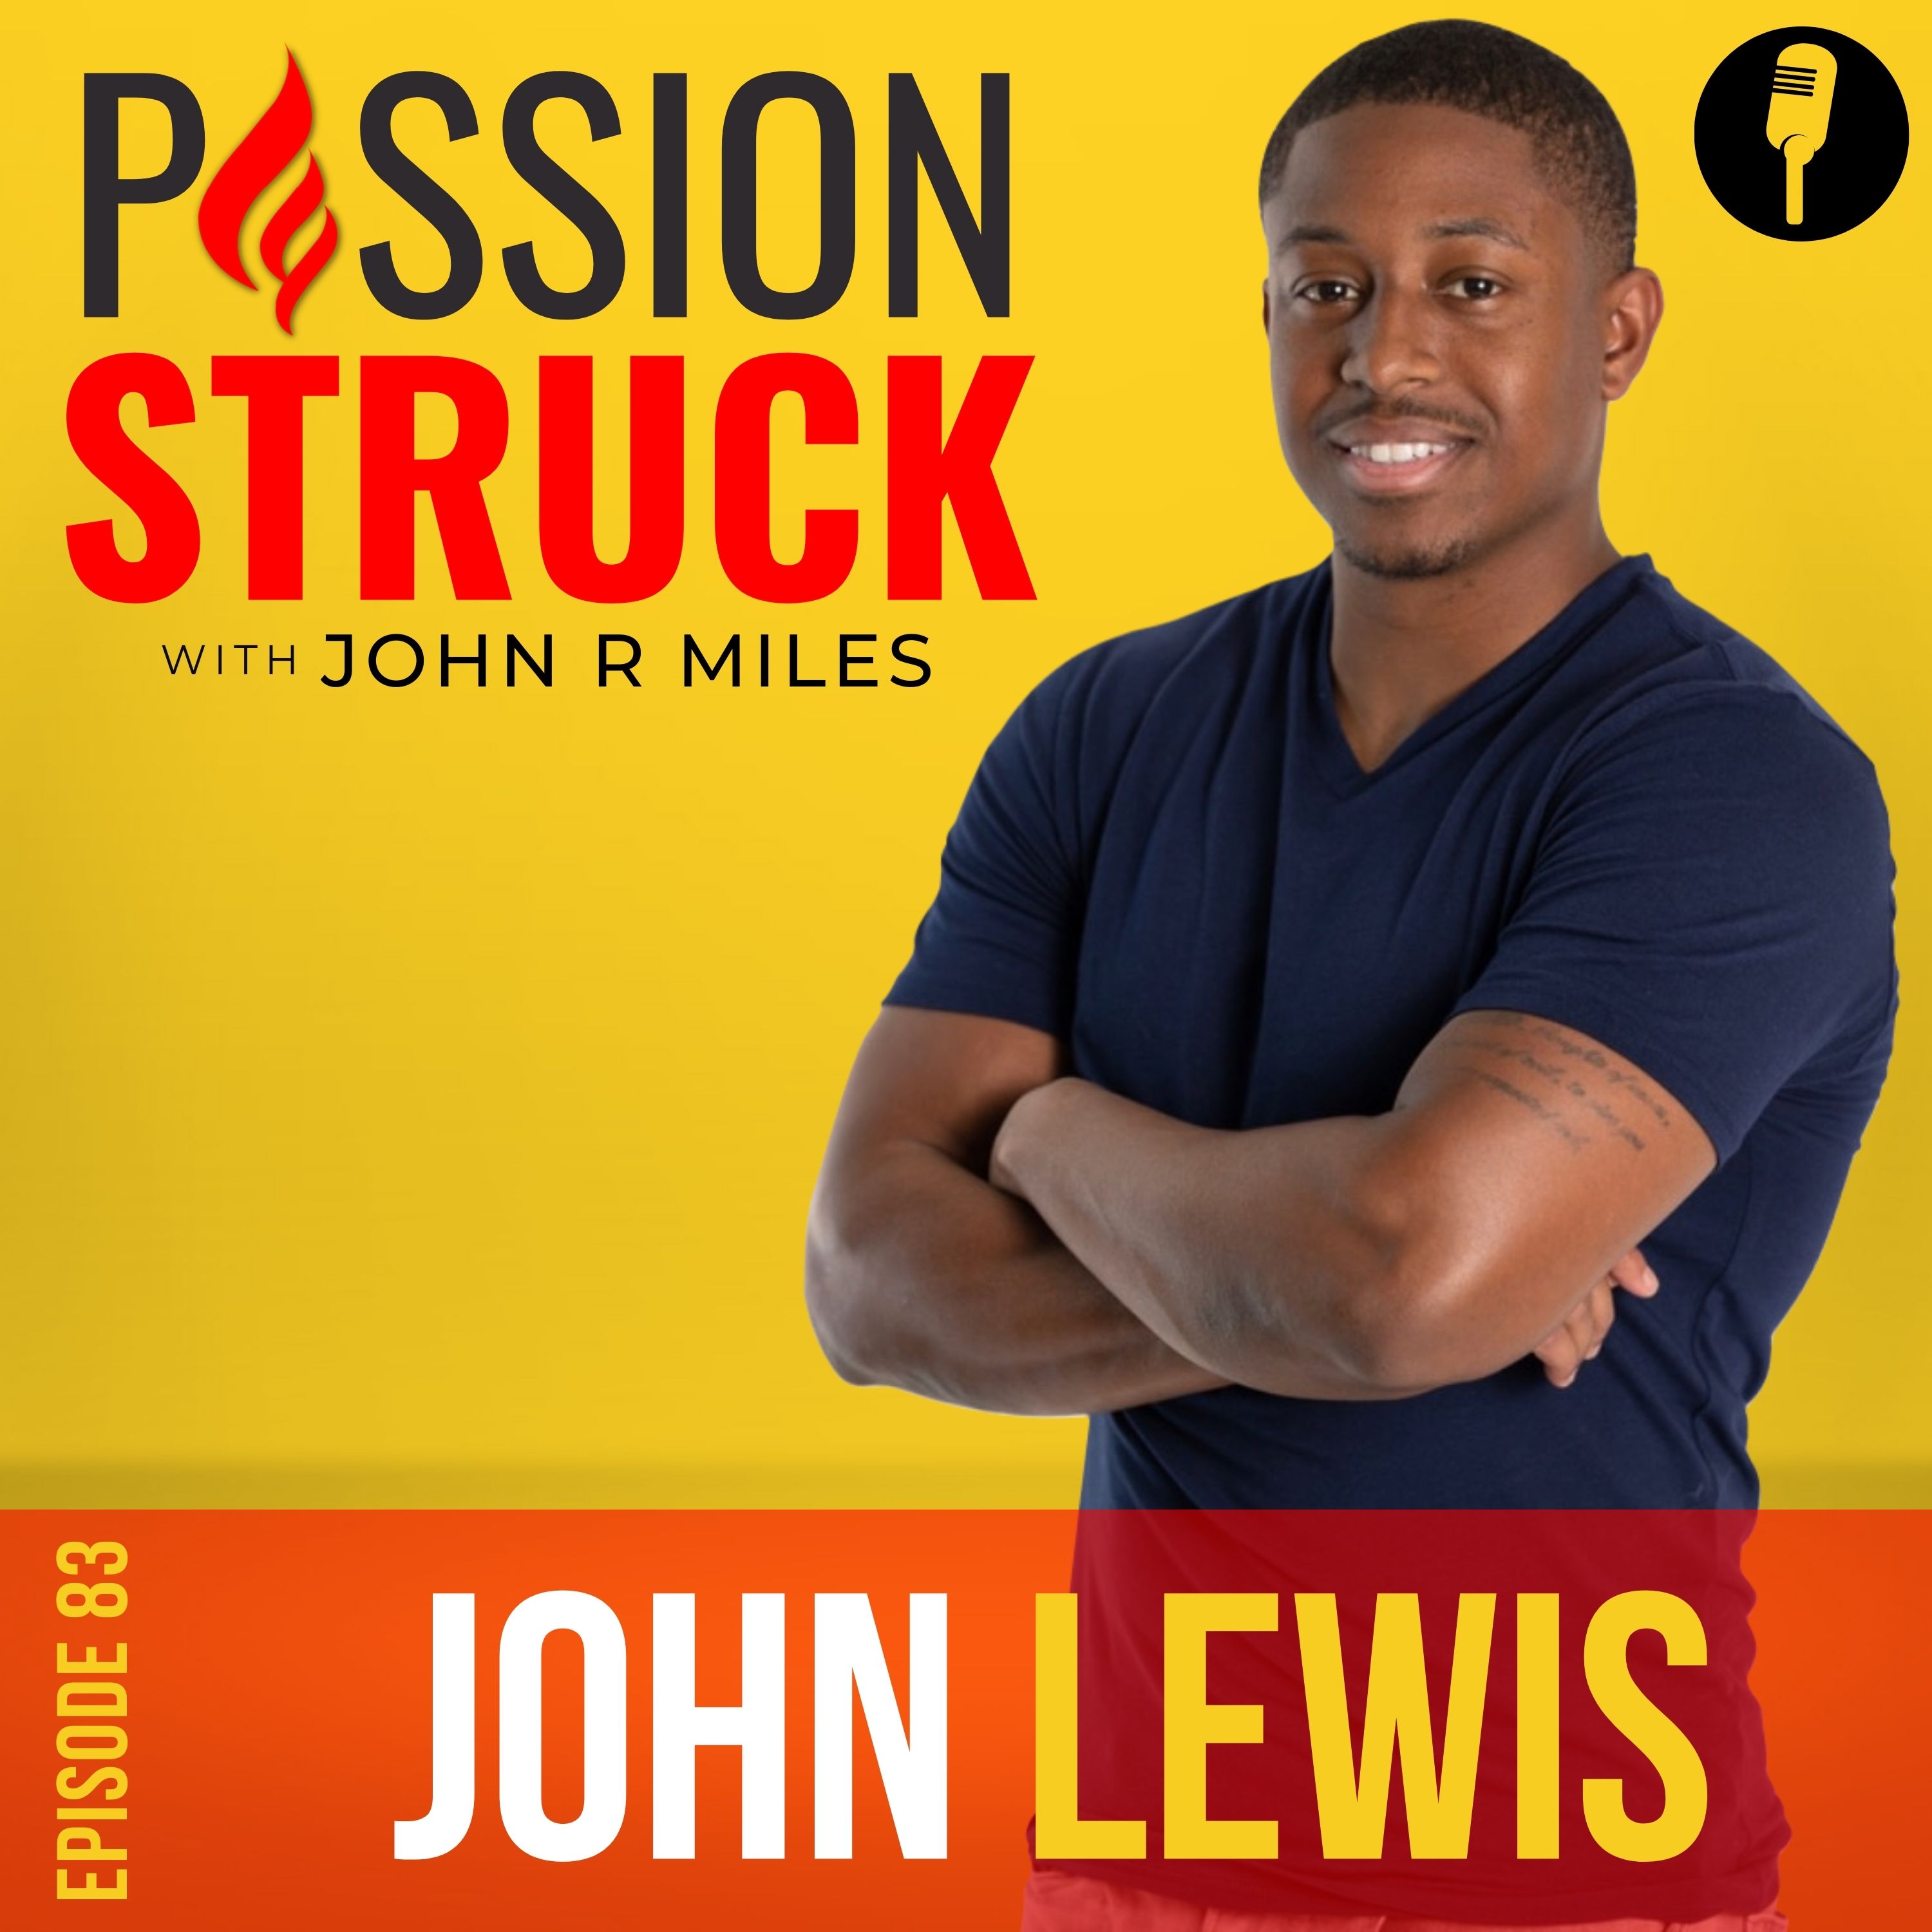 Passion Struck podcast episode 83 album cover with John Lewis